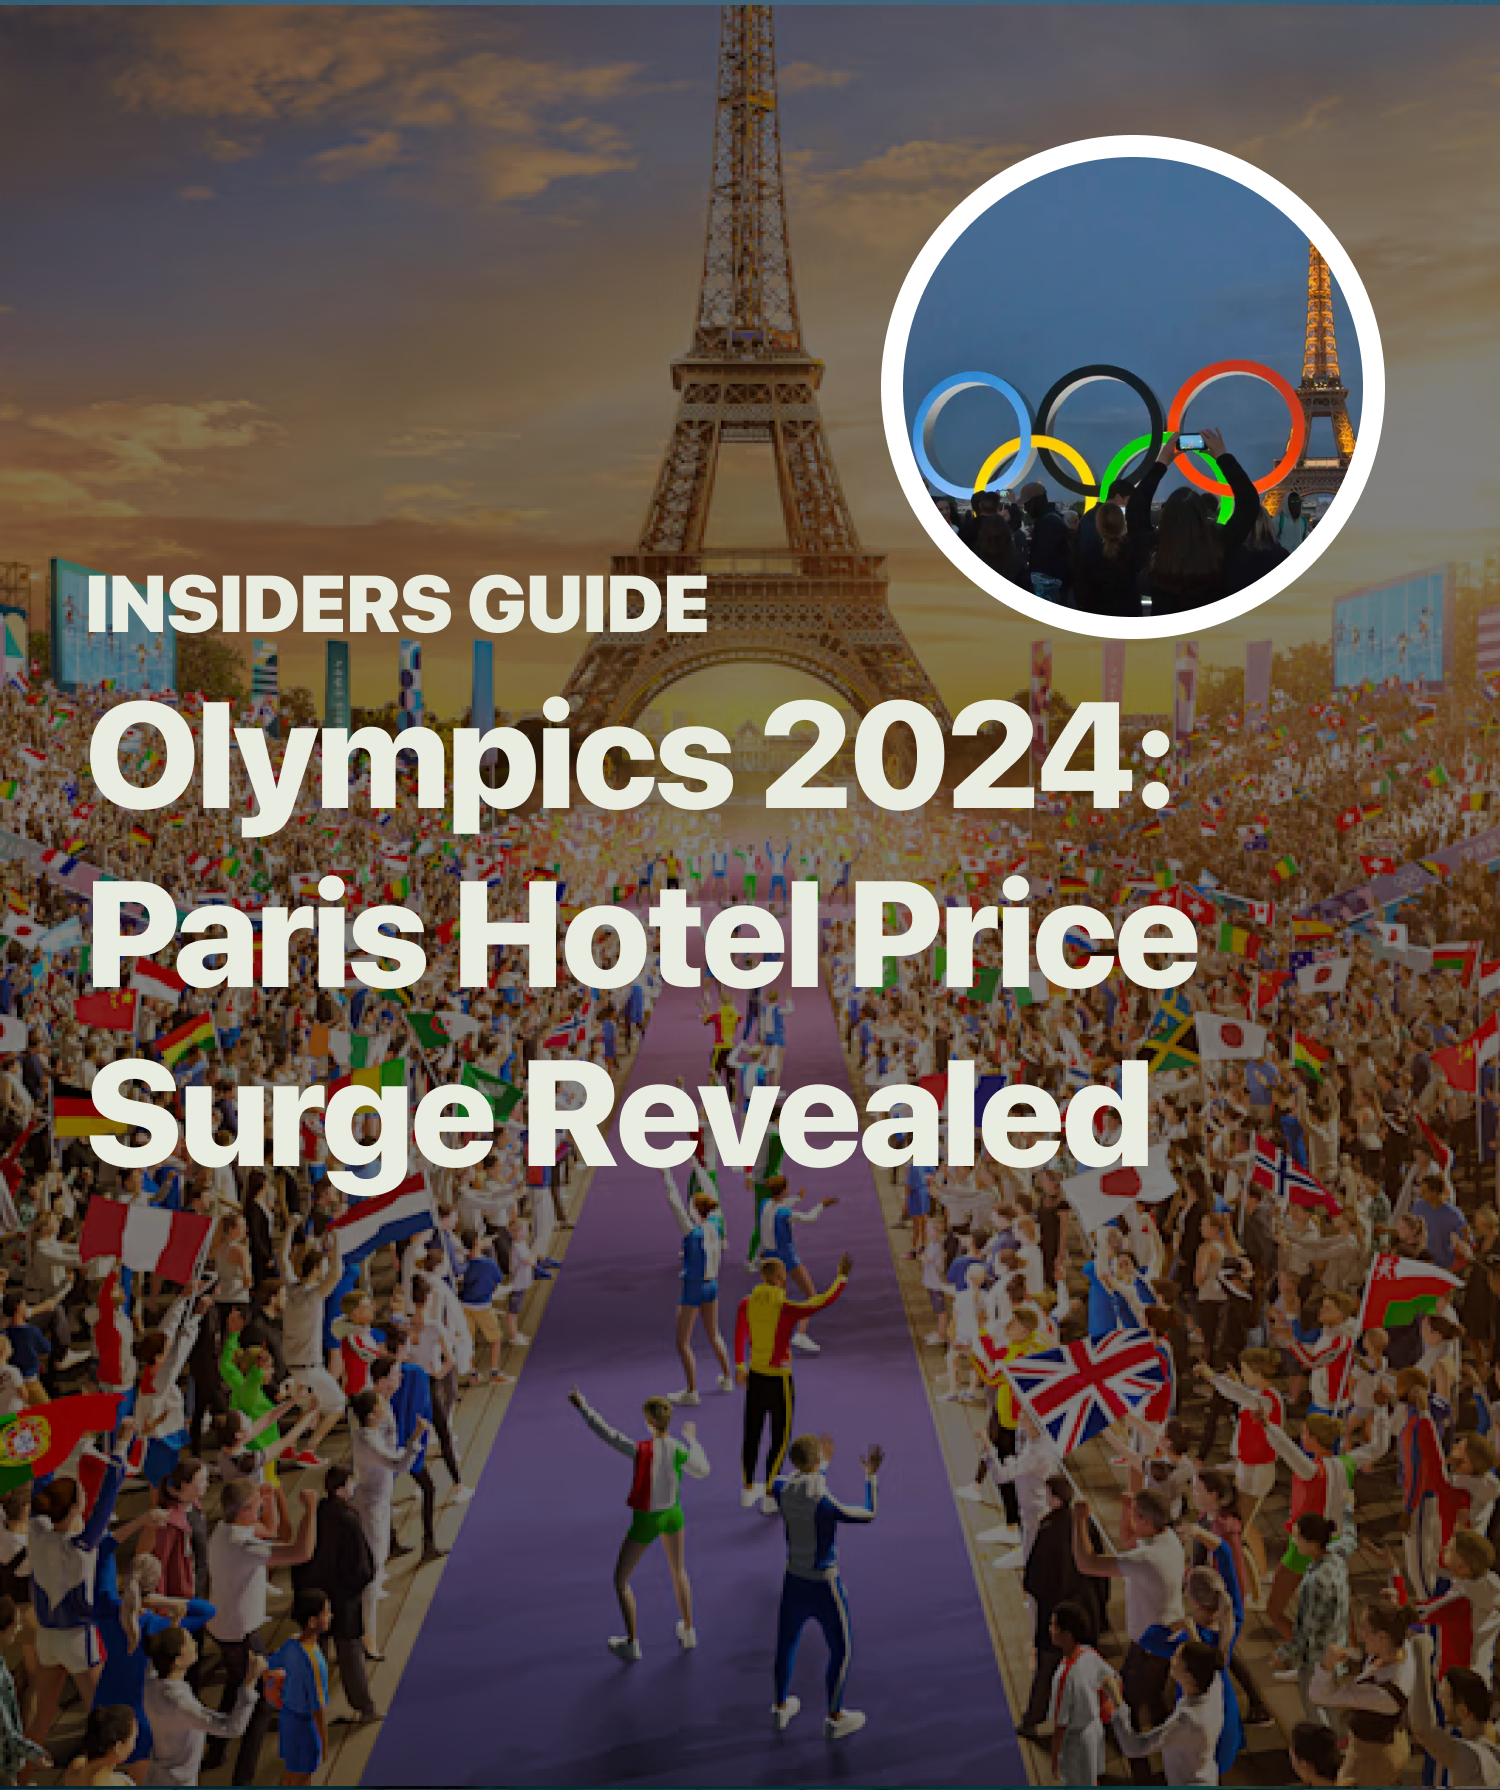 Paris Hotel Prices Surge 92.4% for the Olympics: A Comprehensive Analysis